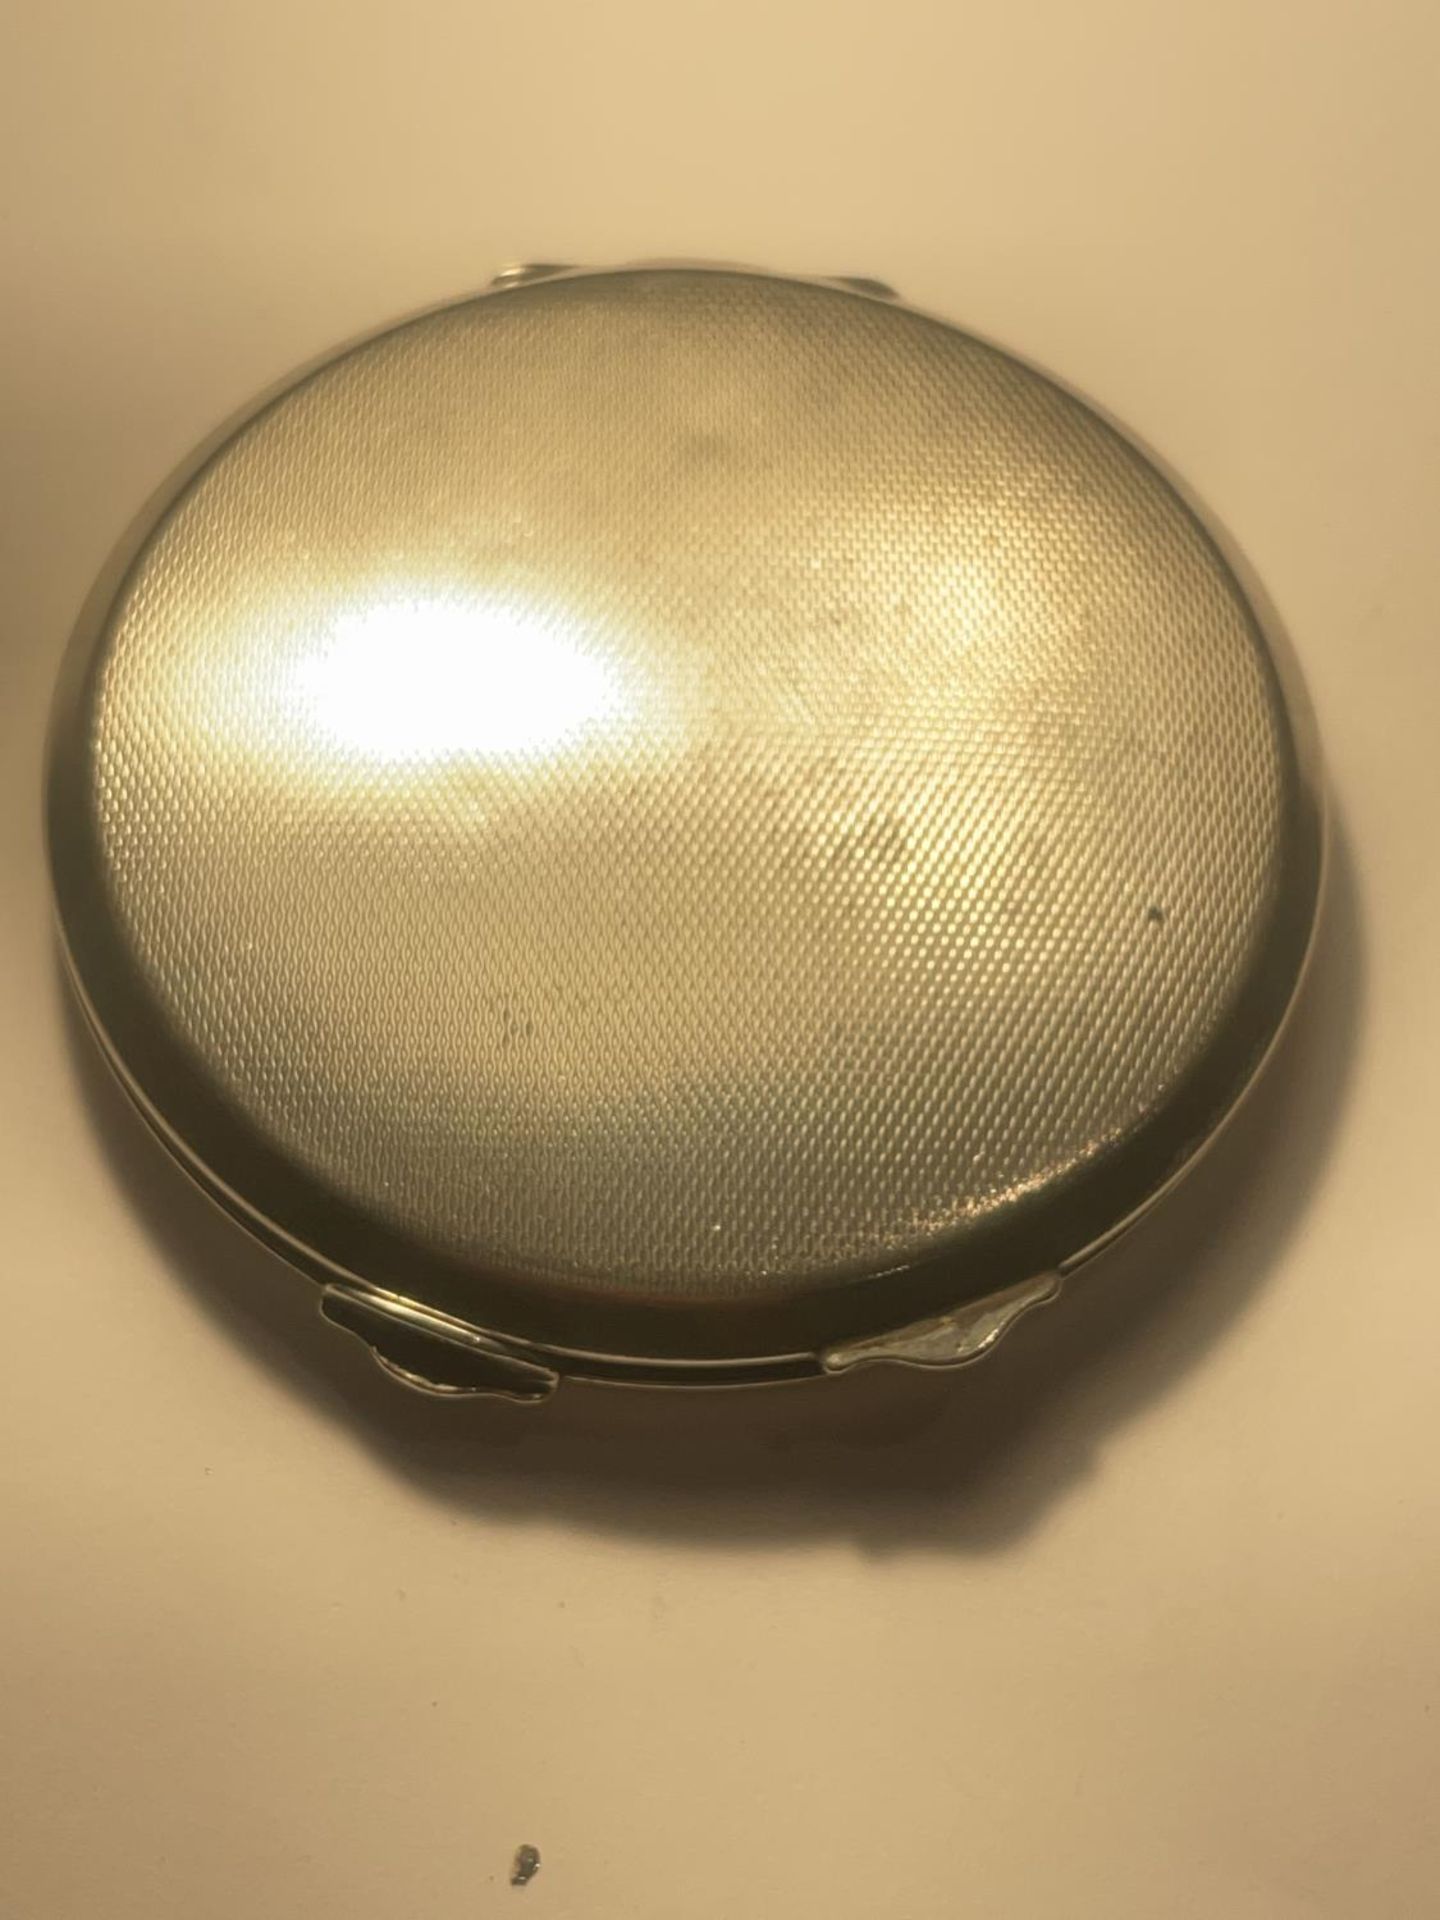 A SILVER COMPACT - Image 2 of 4